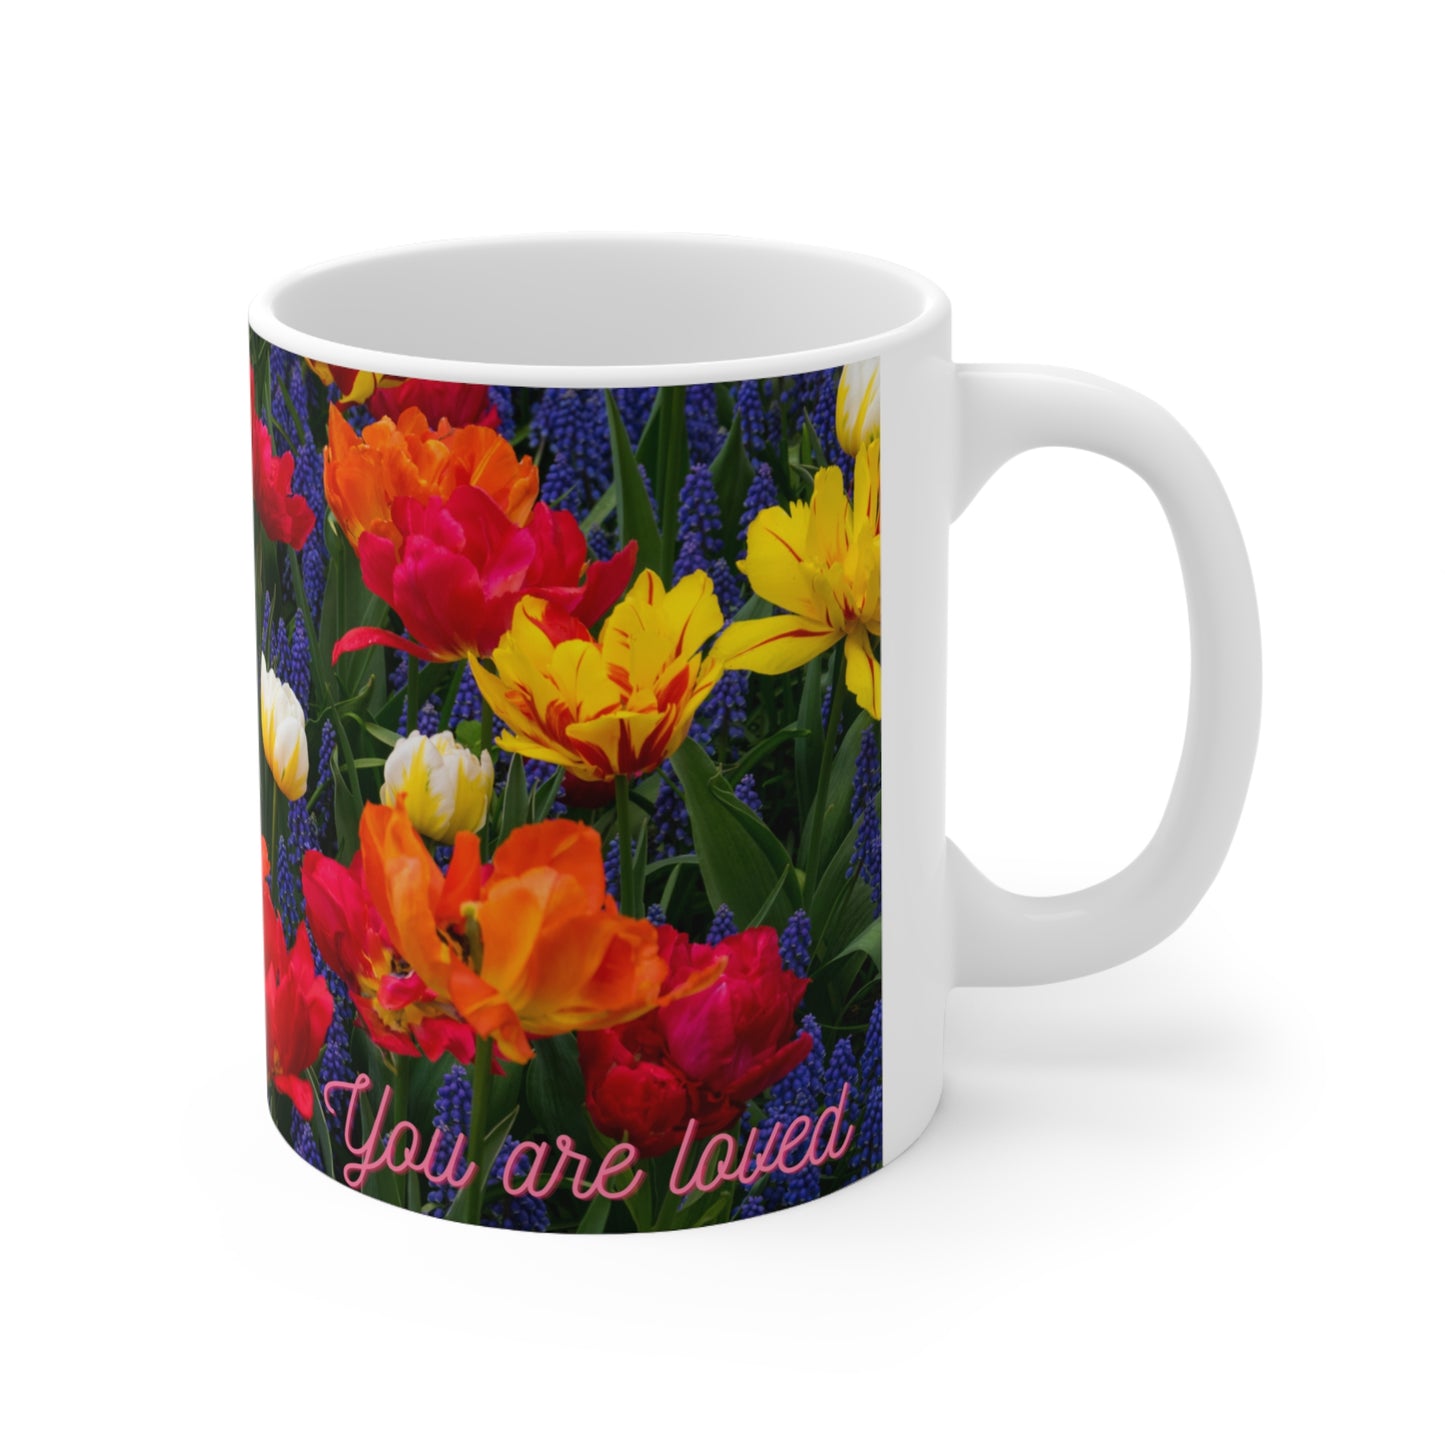 Motivational “You are loved” Mug perfect for those people who are loved, a great way to share this wonderful reminder to a friend, family member, colleague or yourself.